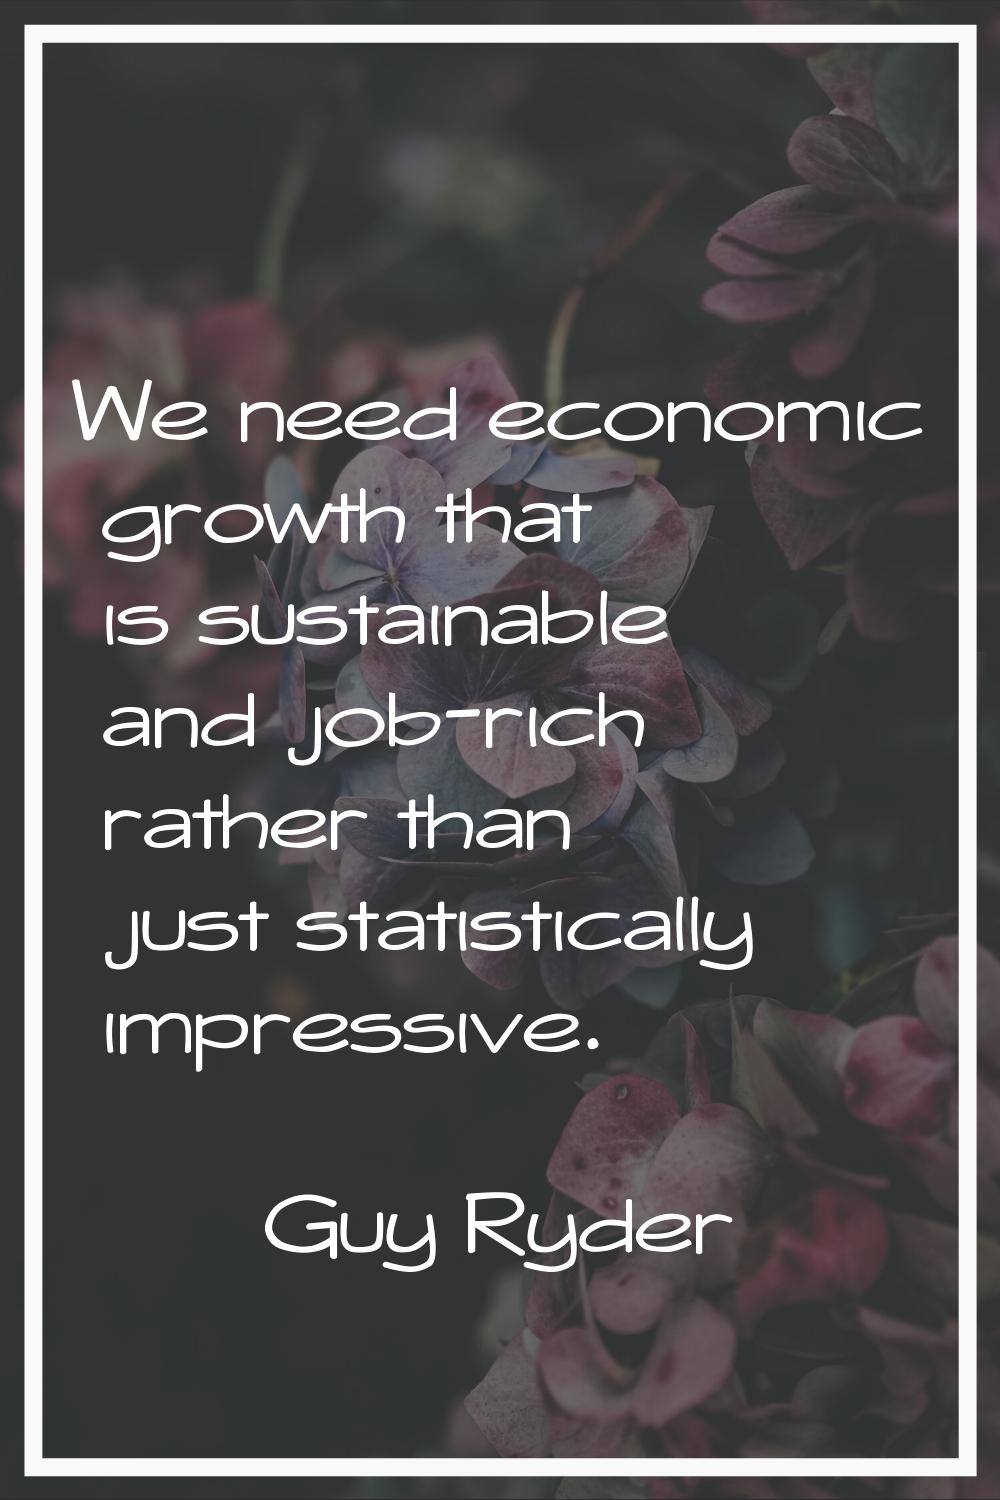 We need economic growth that is sustainable and job-rich rather than just statistically impressive.